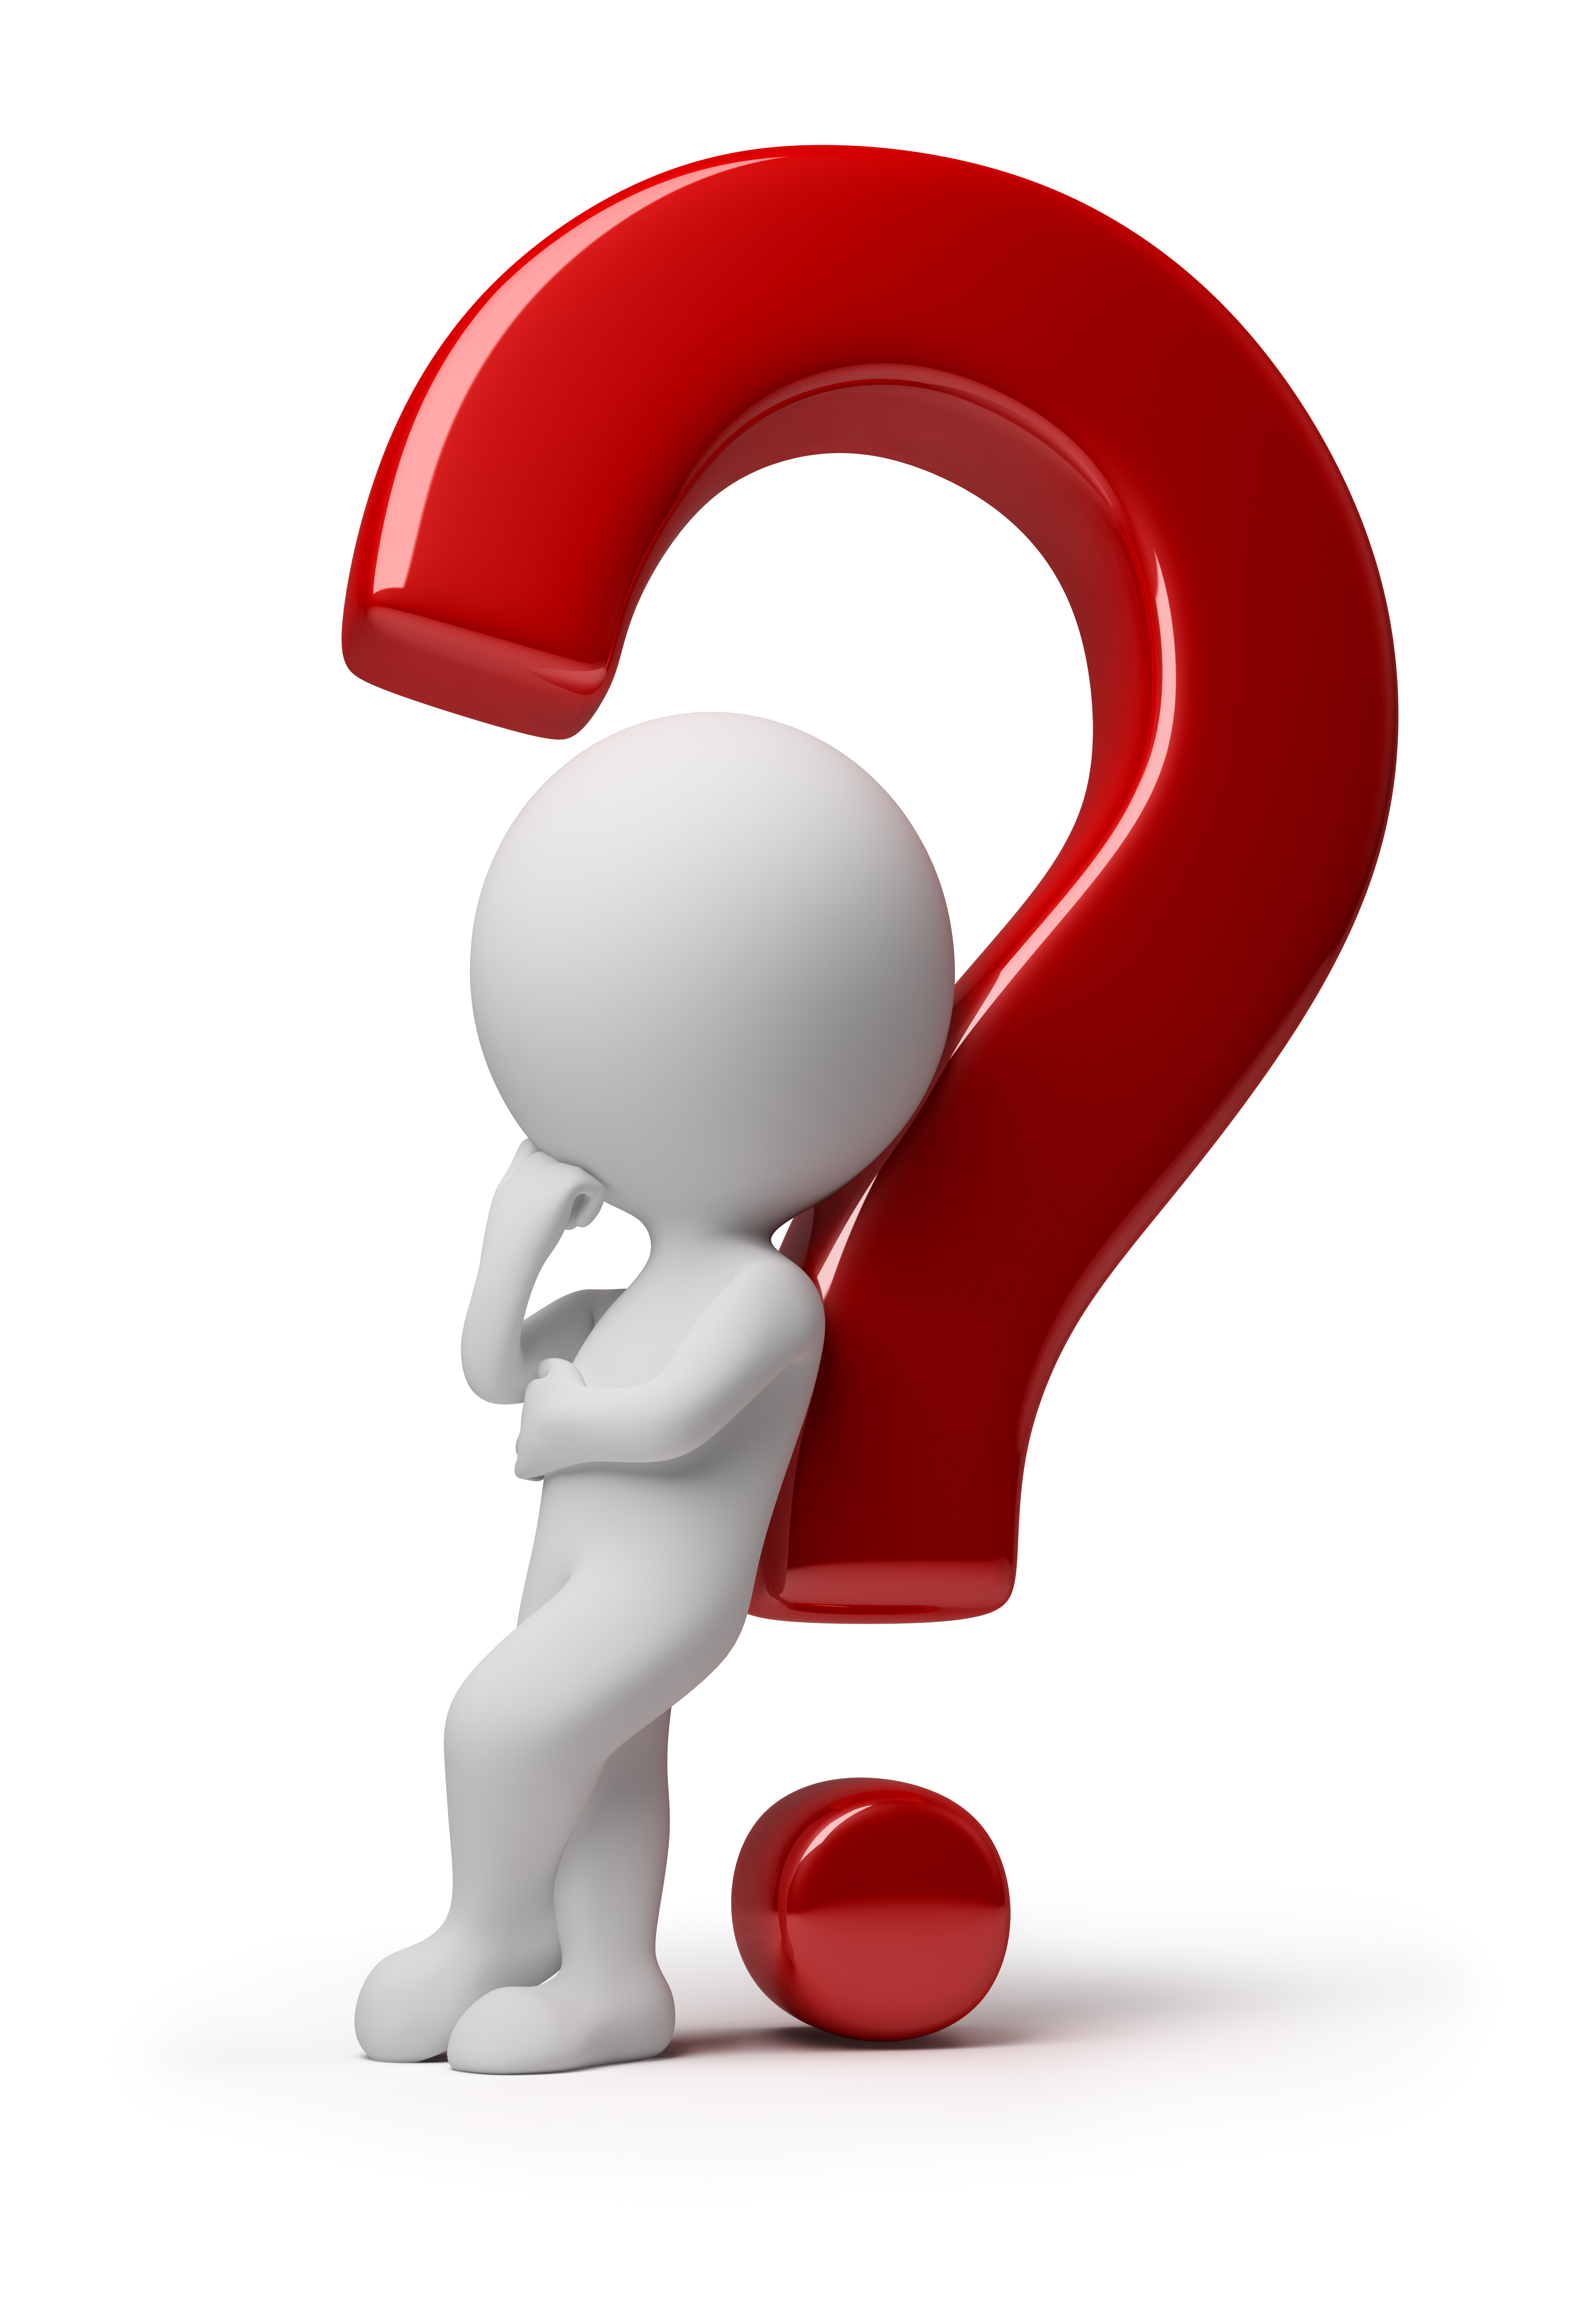 clipart image of question mark - photo #45